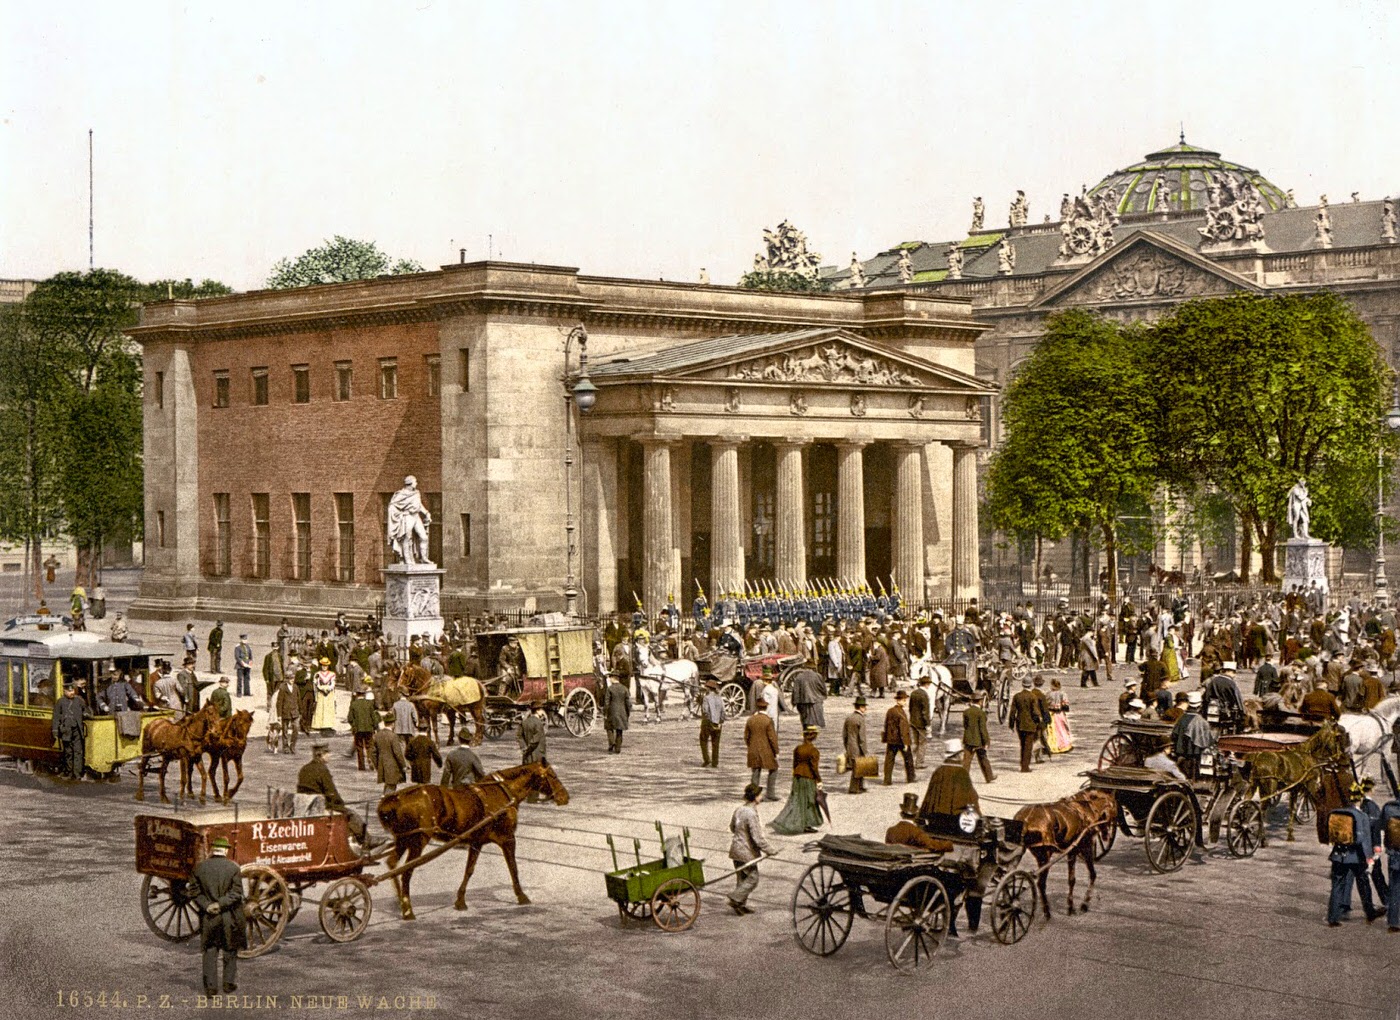 The "New Guard" and street scene, Berlin, Germany, 1890